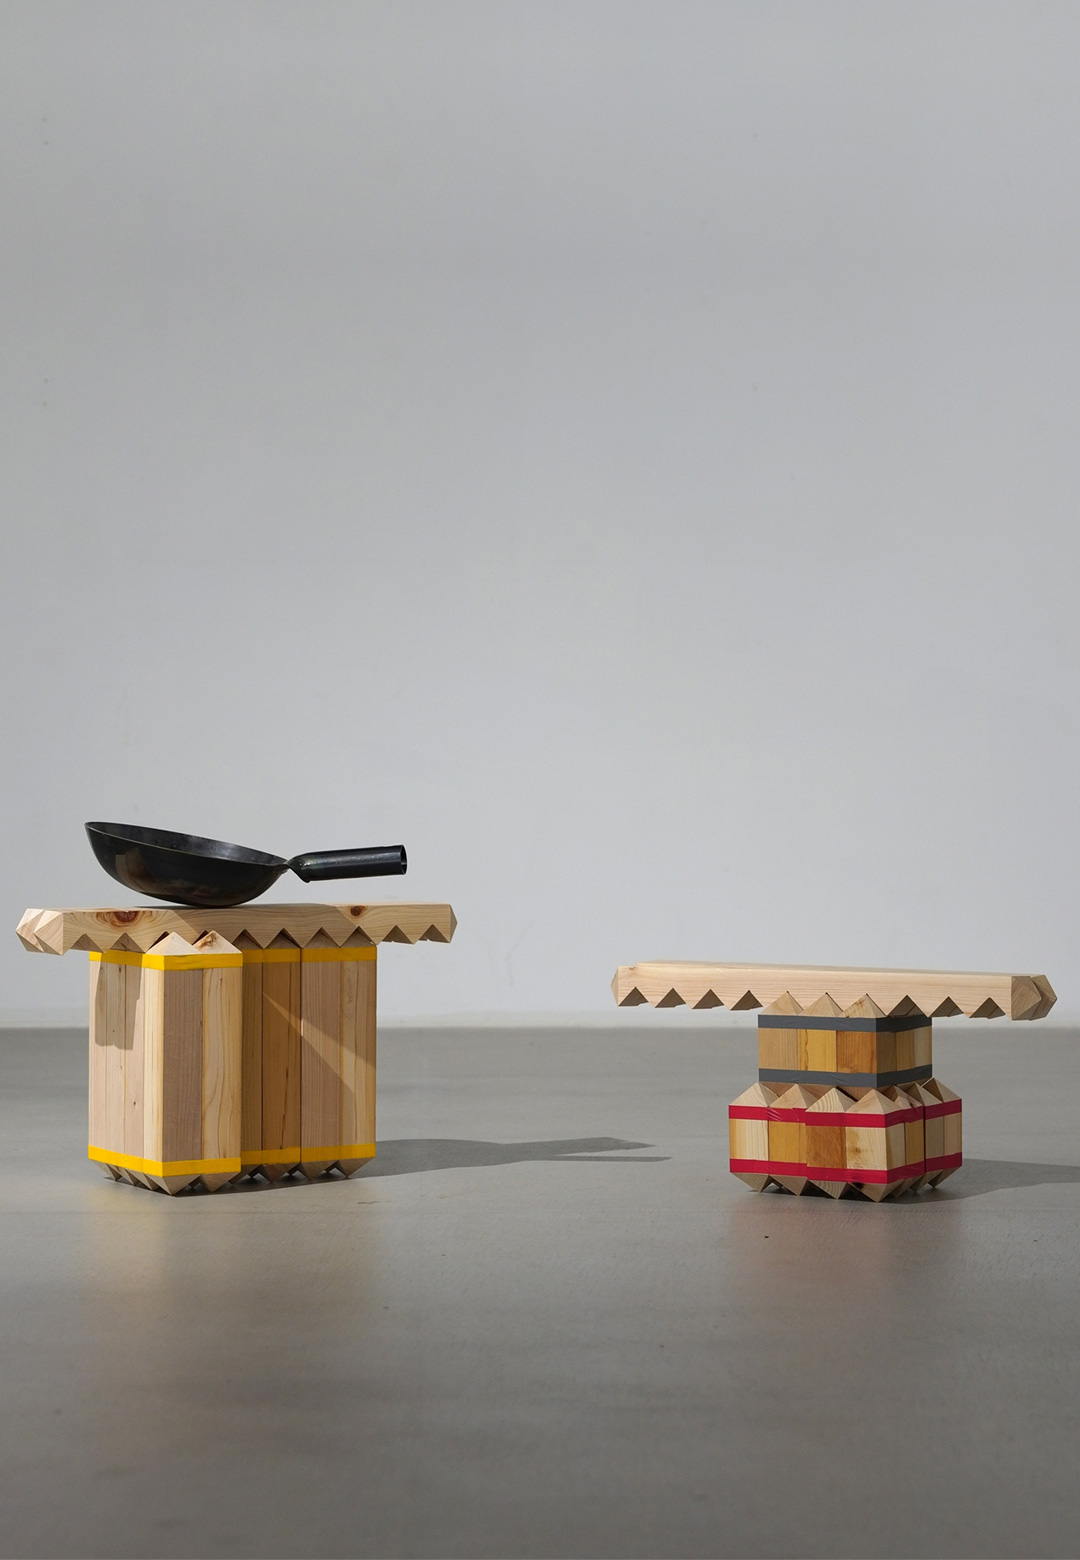 Deku by Takuto Ohta comprises wooden blocks stacked in different configurations